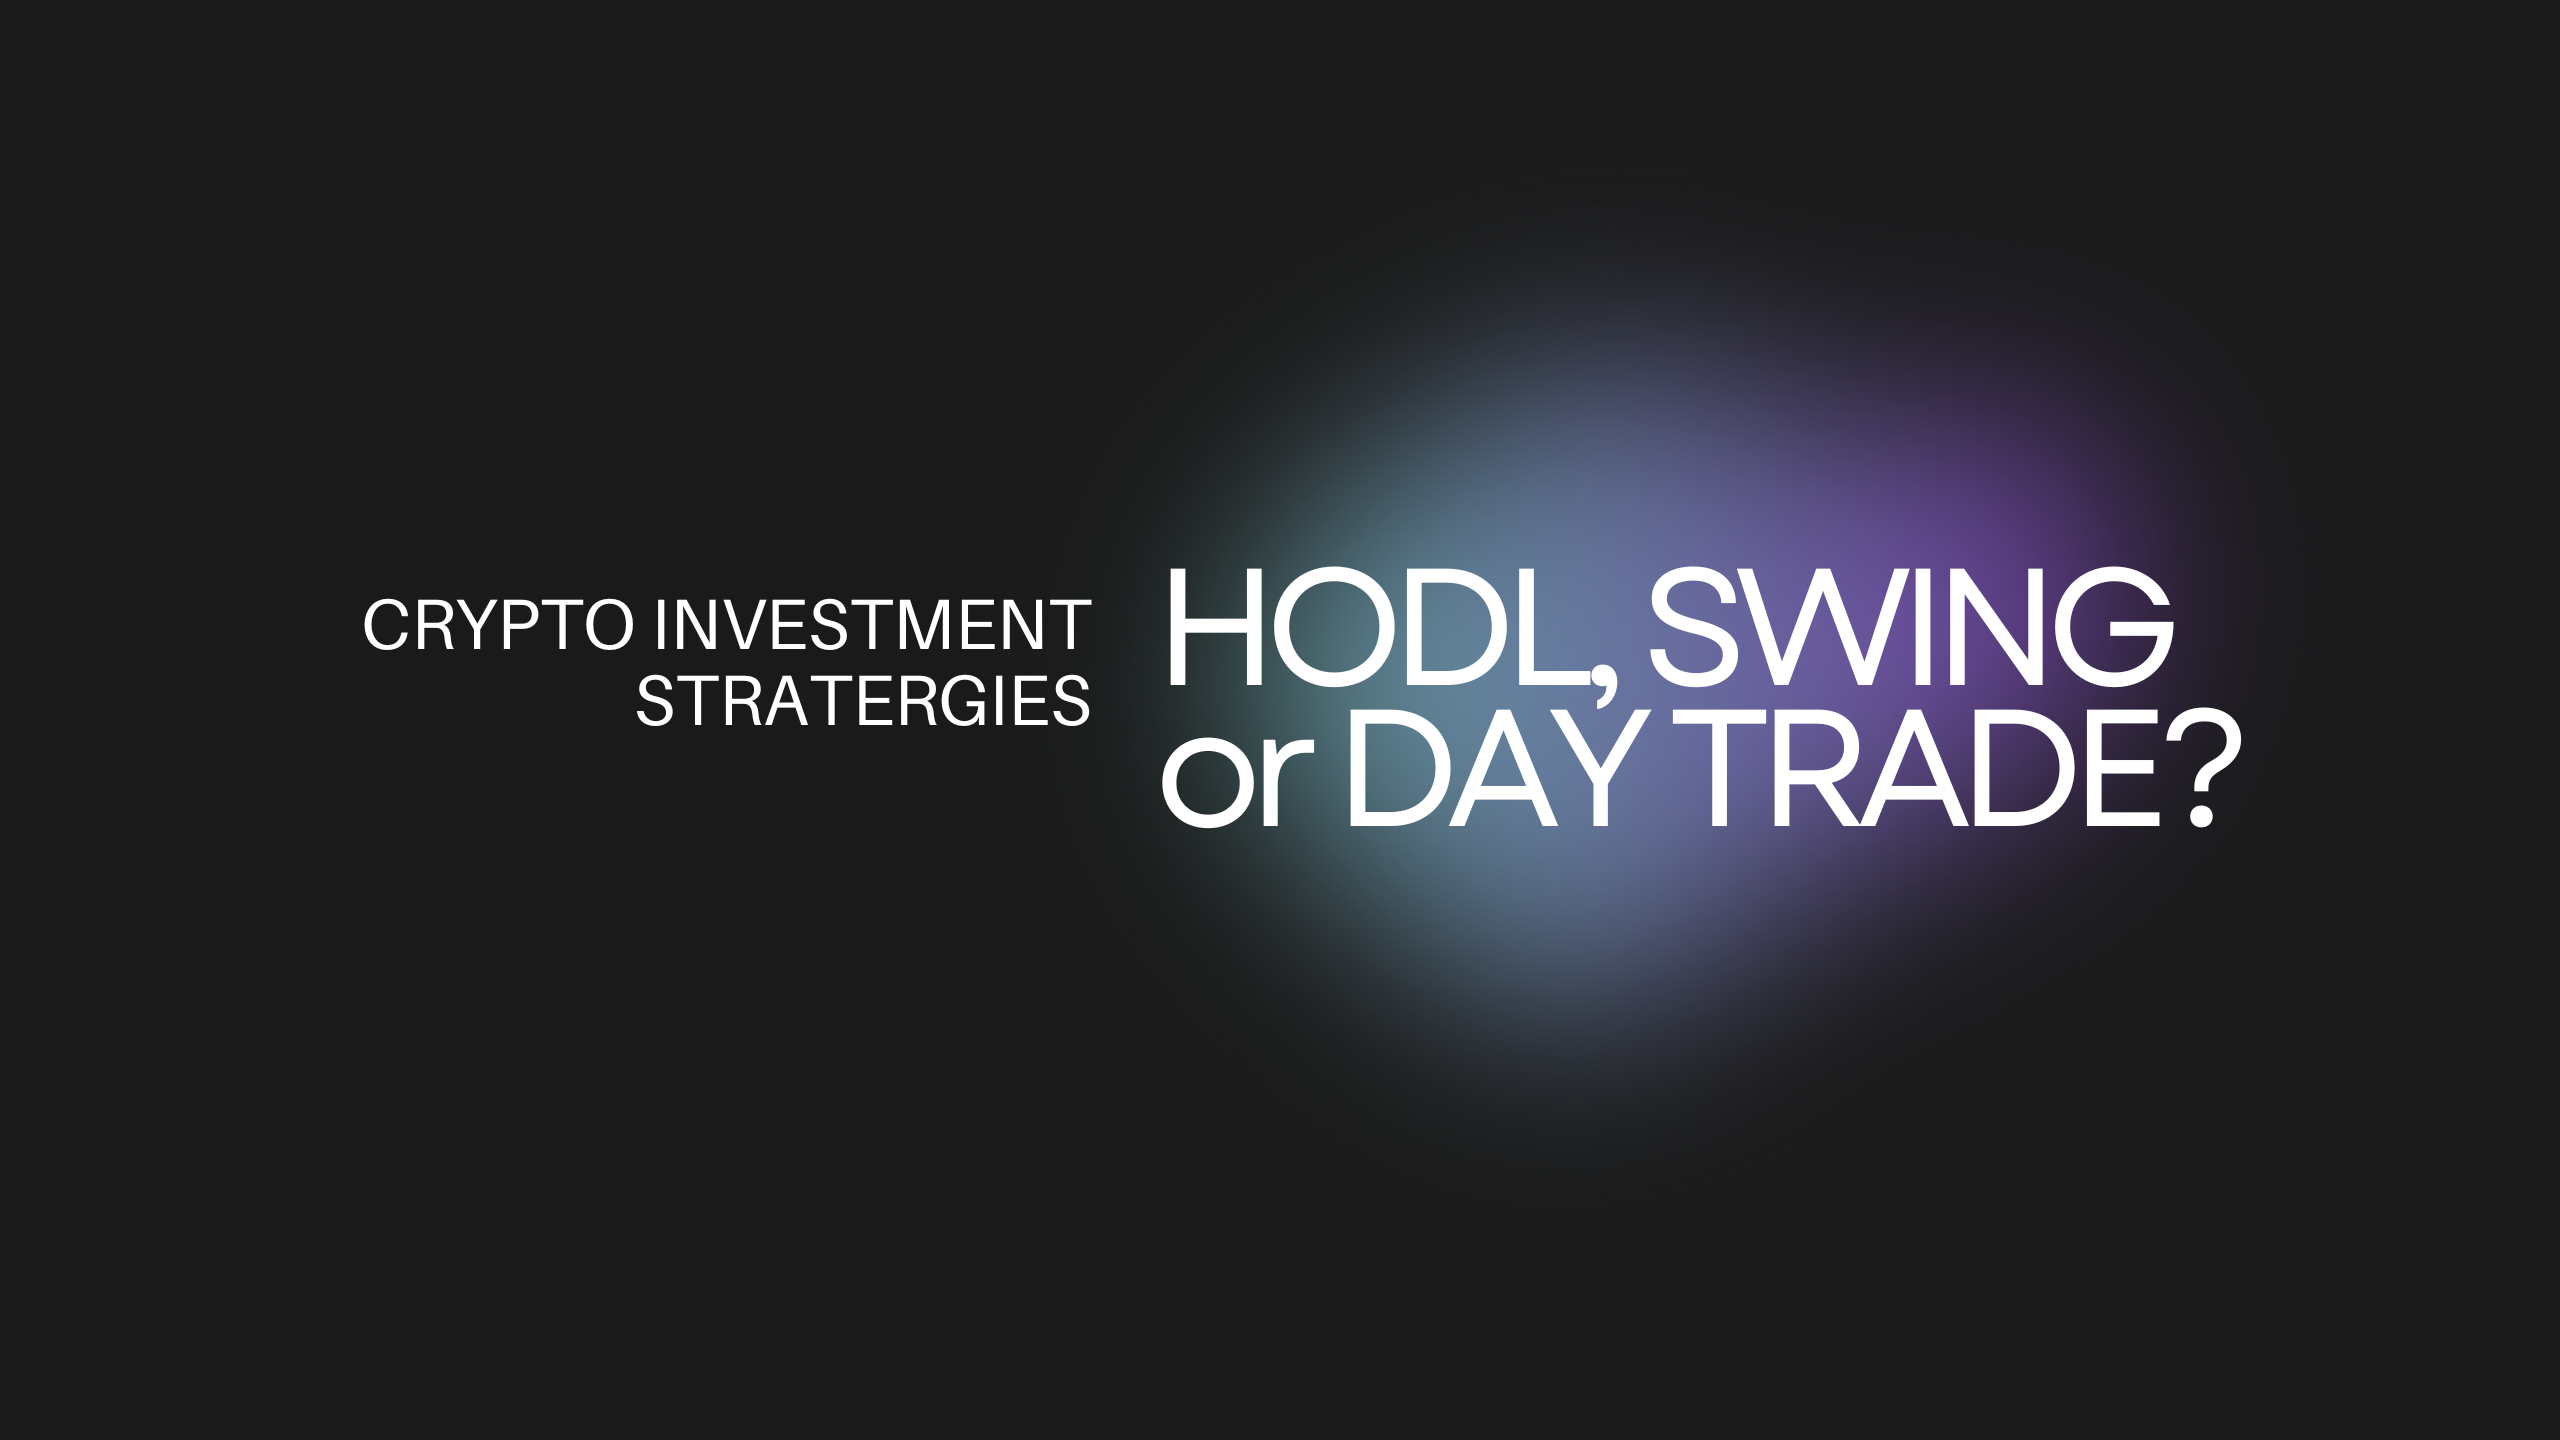 Crypto Trading Strategies: HODL, Swing, or Day Trade?